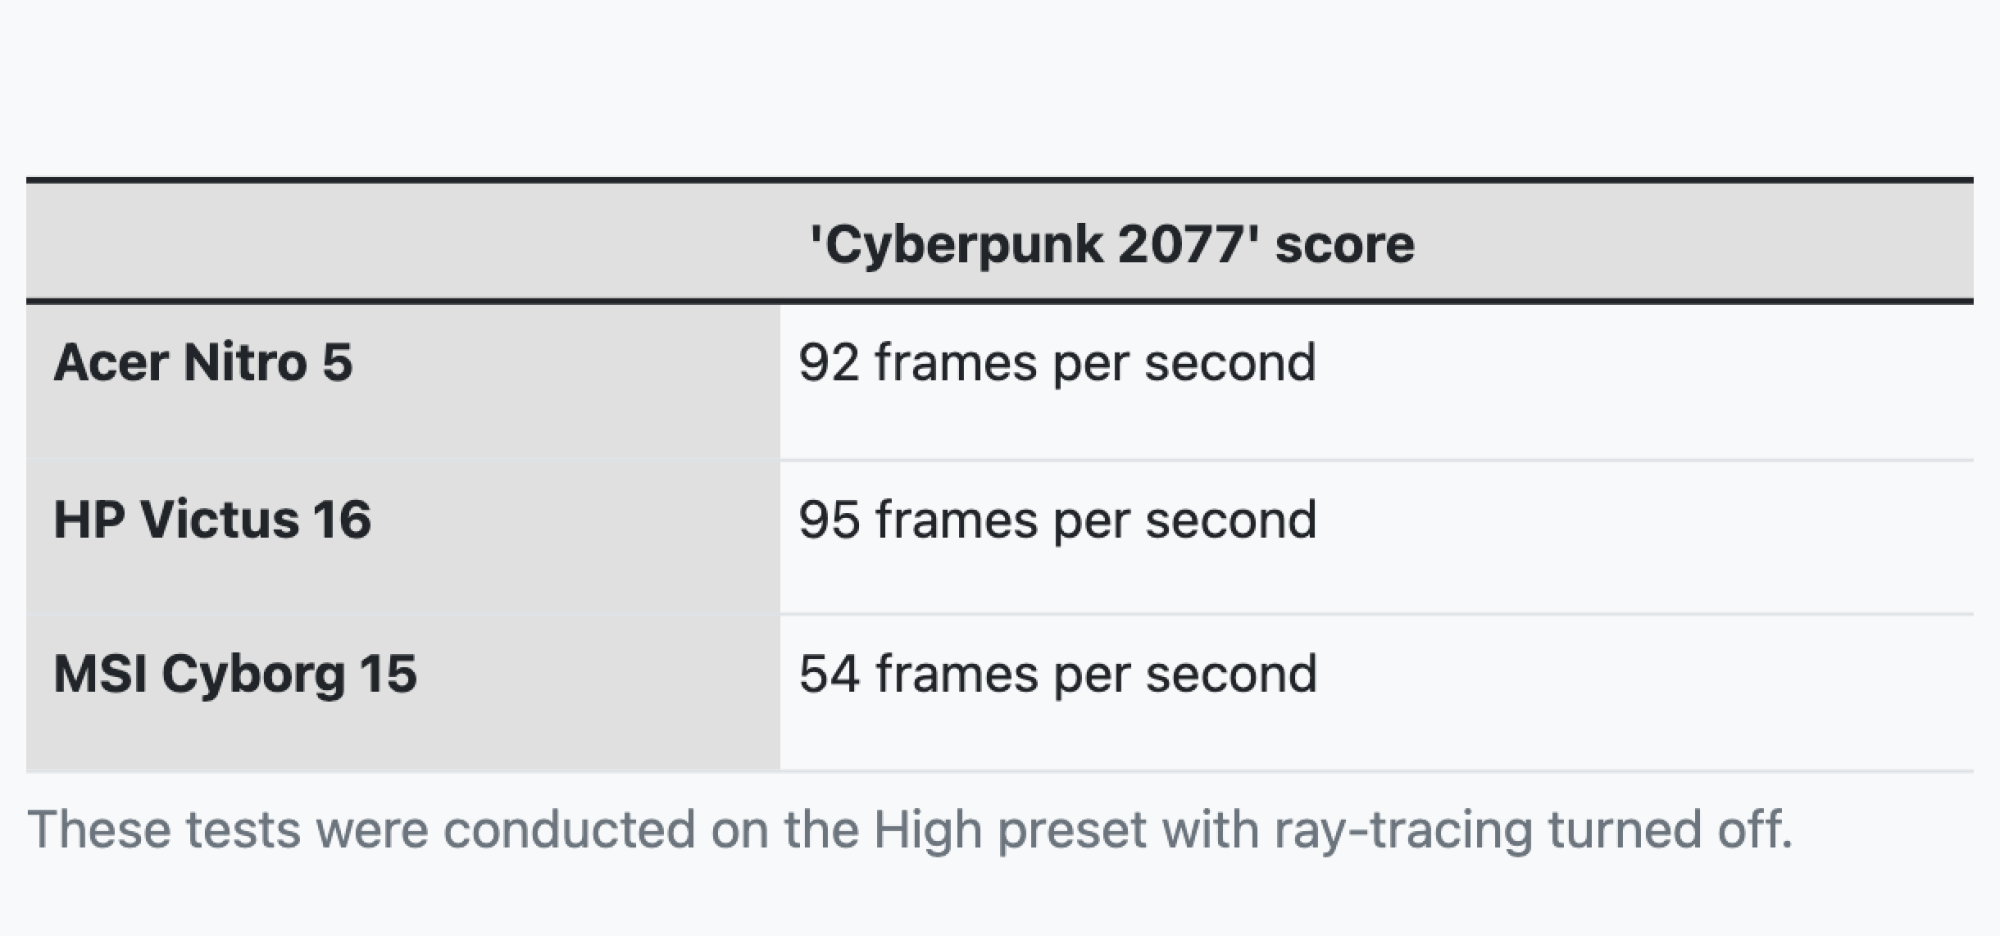 A chart that details the Cyberpunk 2077 scores for three gaming laptops